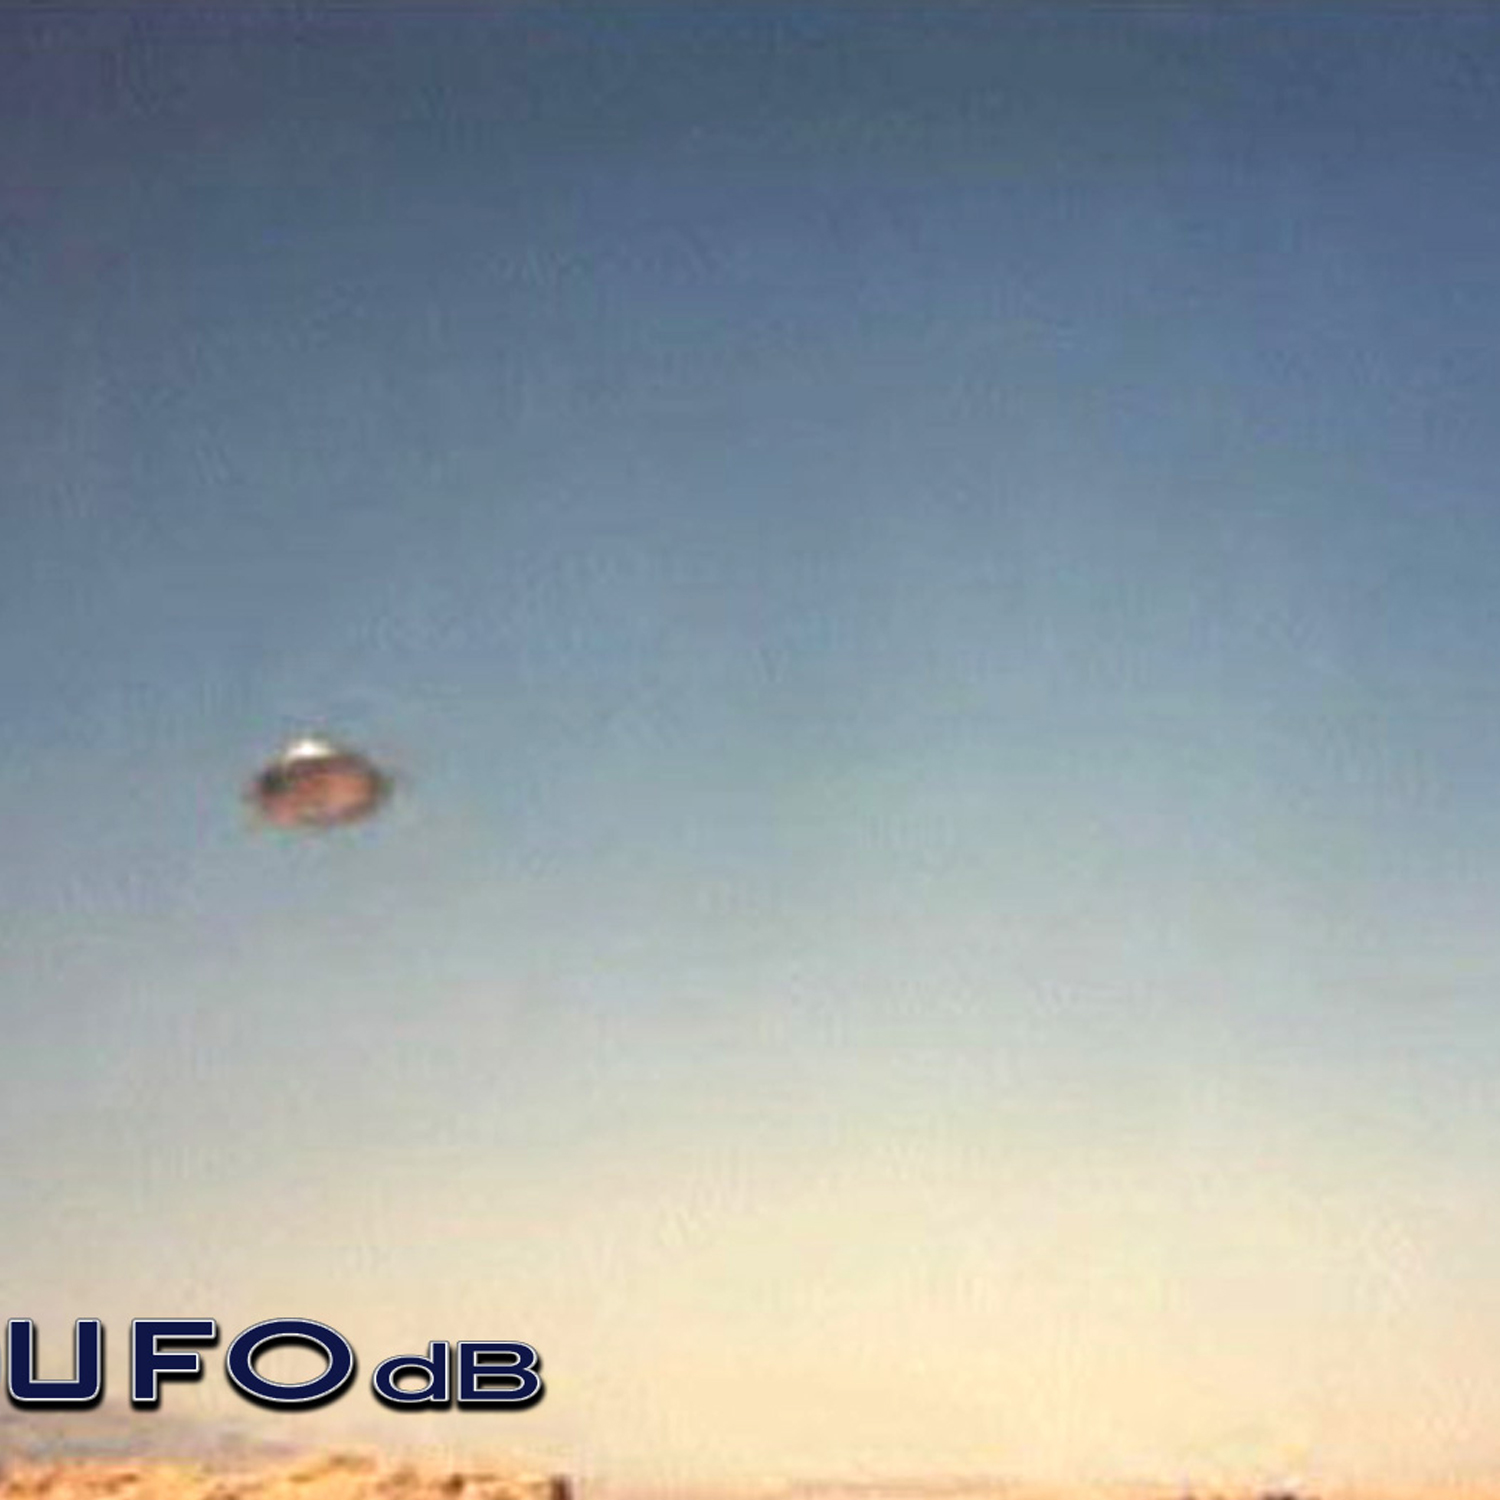 UFO Picture caught in bright day light over desertic mountains UFO Picture #30-2